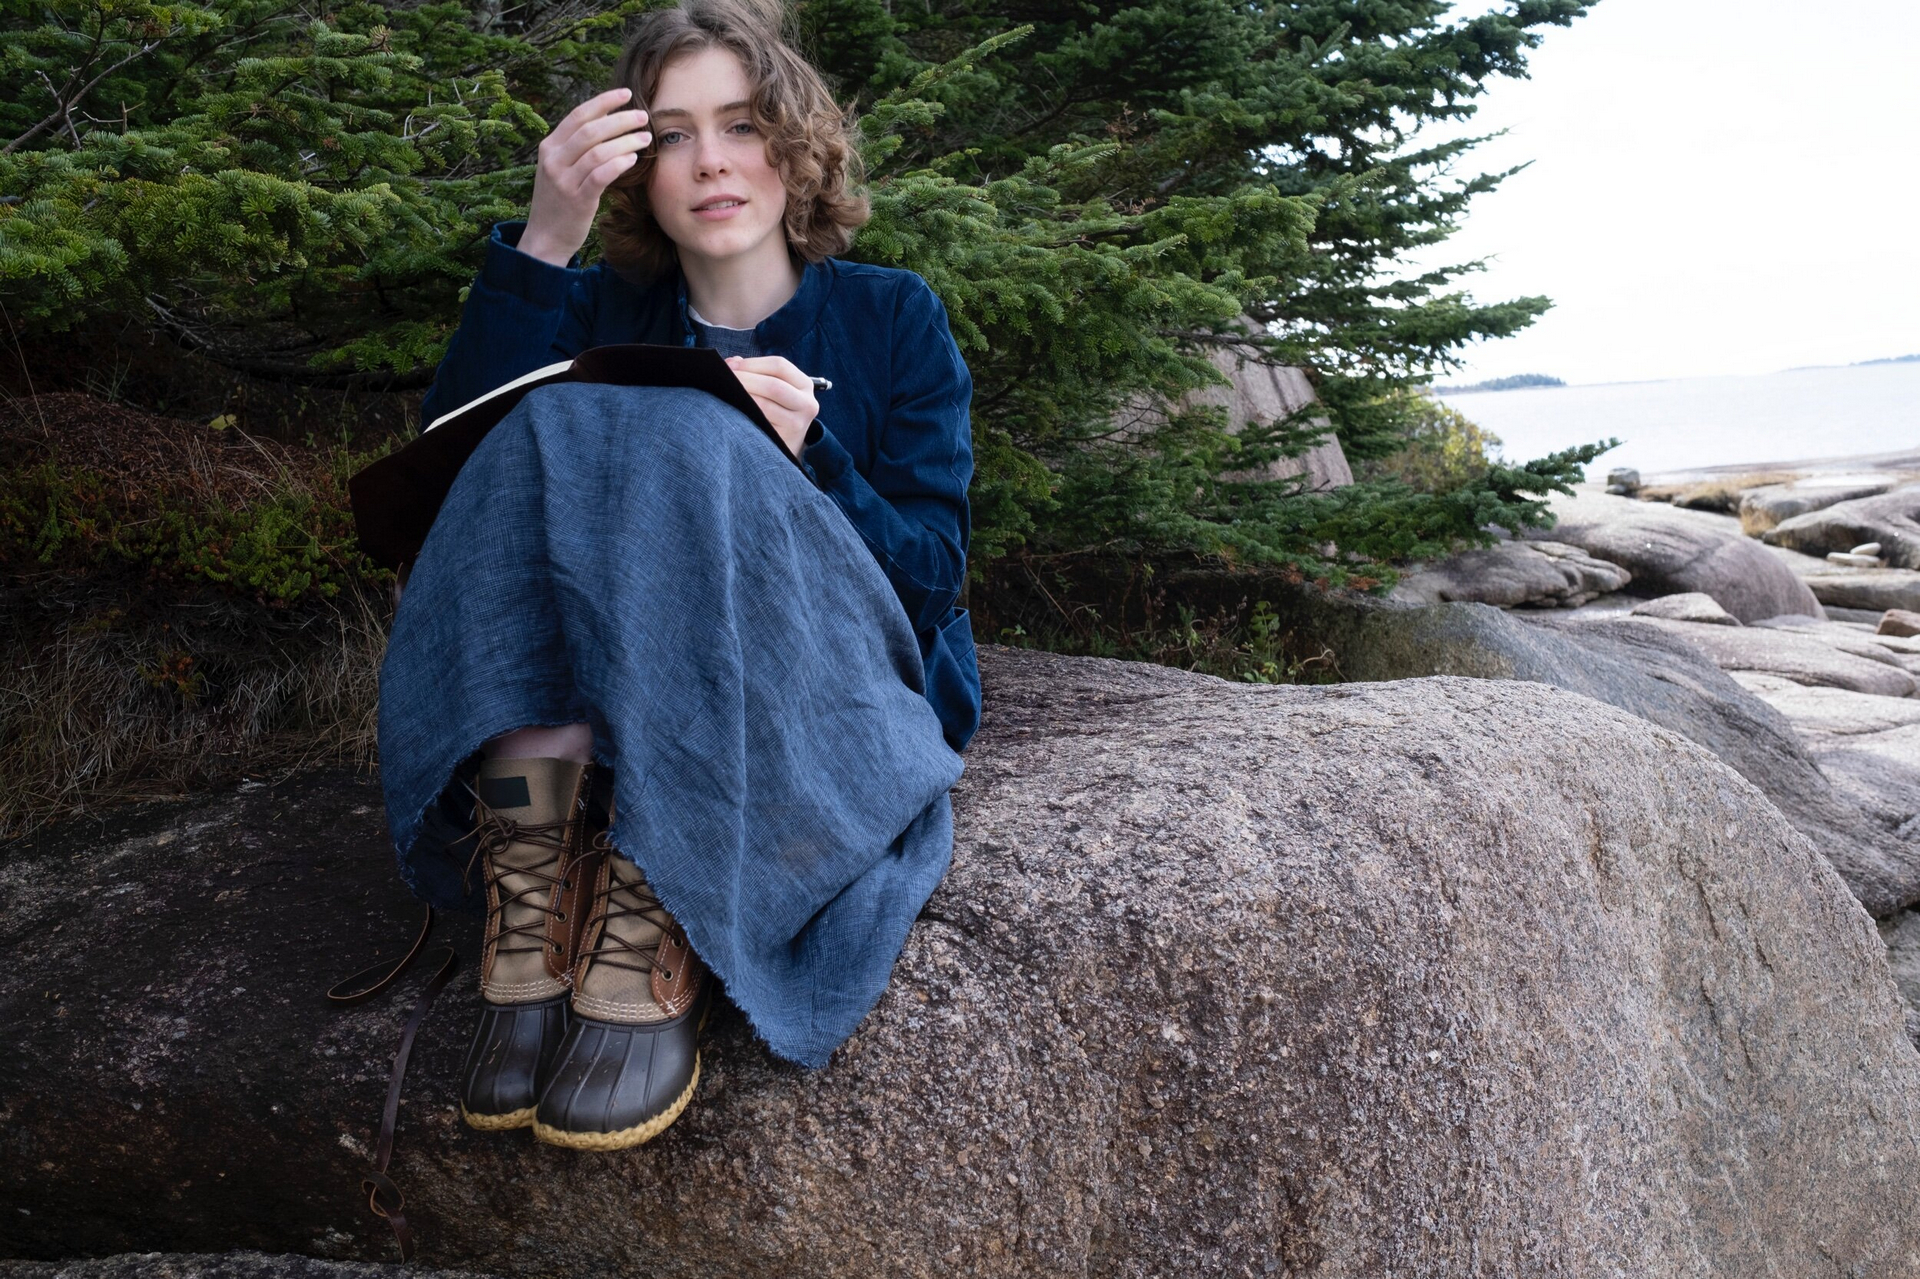 Sophia Lillis Actress Celebrity Looking At Viewer Women Outdoors Women Sitting On The Ground Rocks P 1920x1279